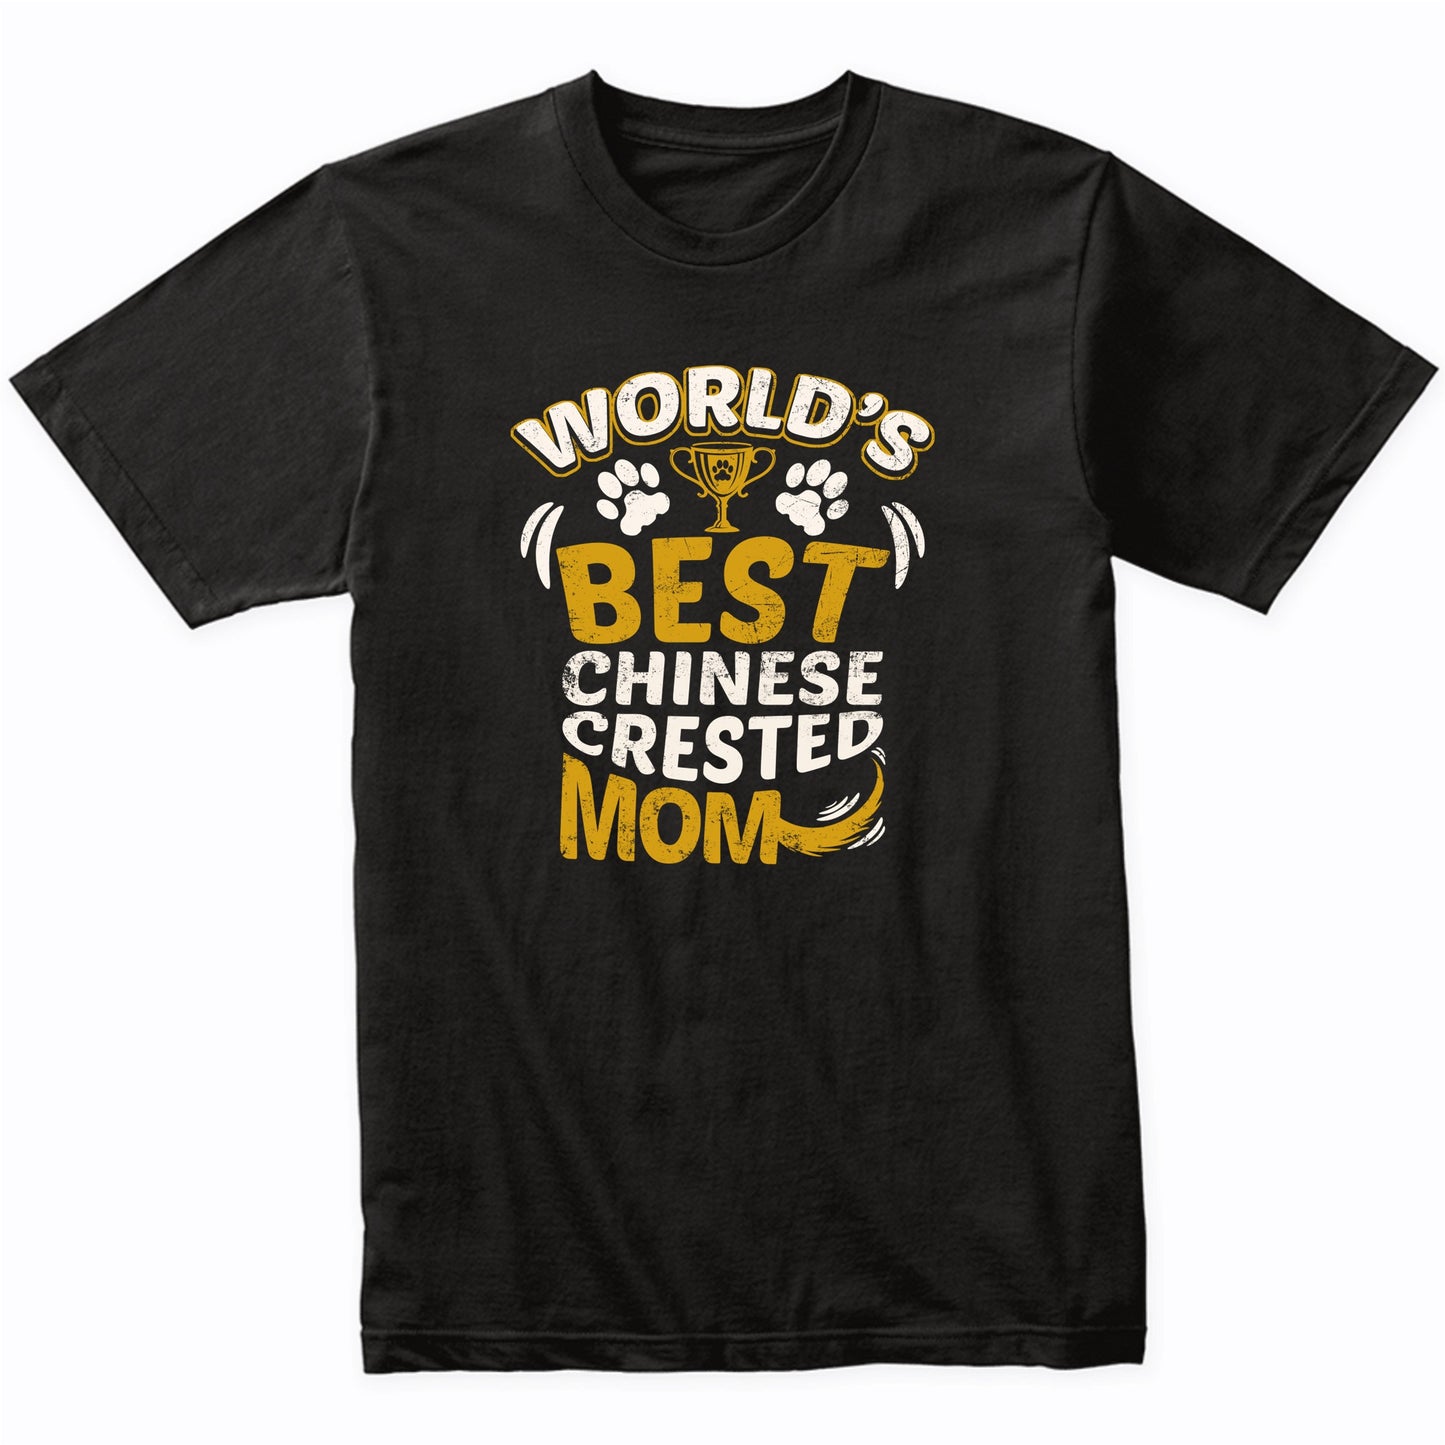 World's Best Chinese Crested Mom Graphic T-Shirt